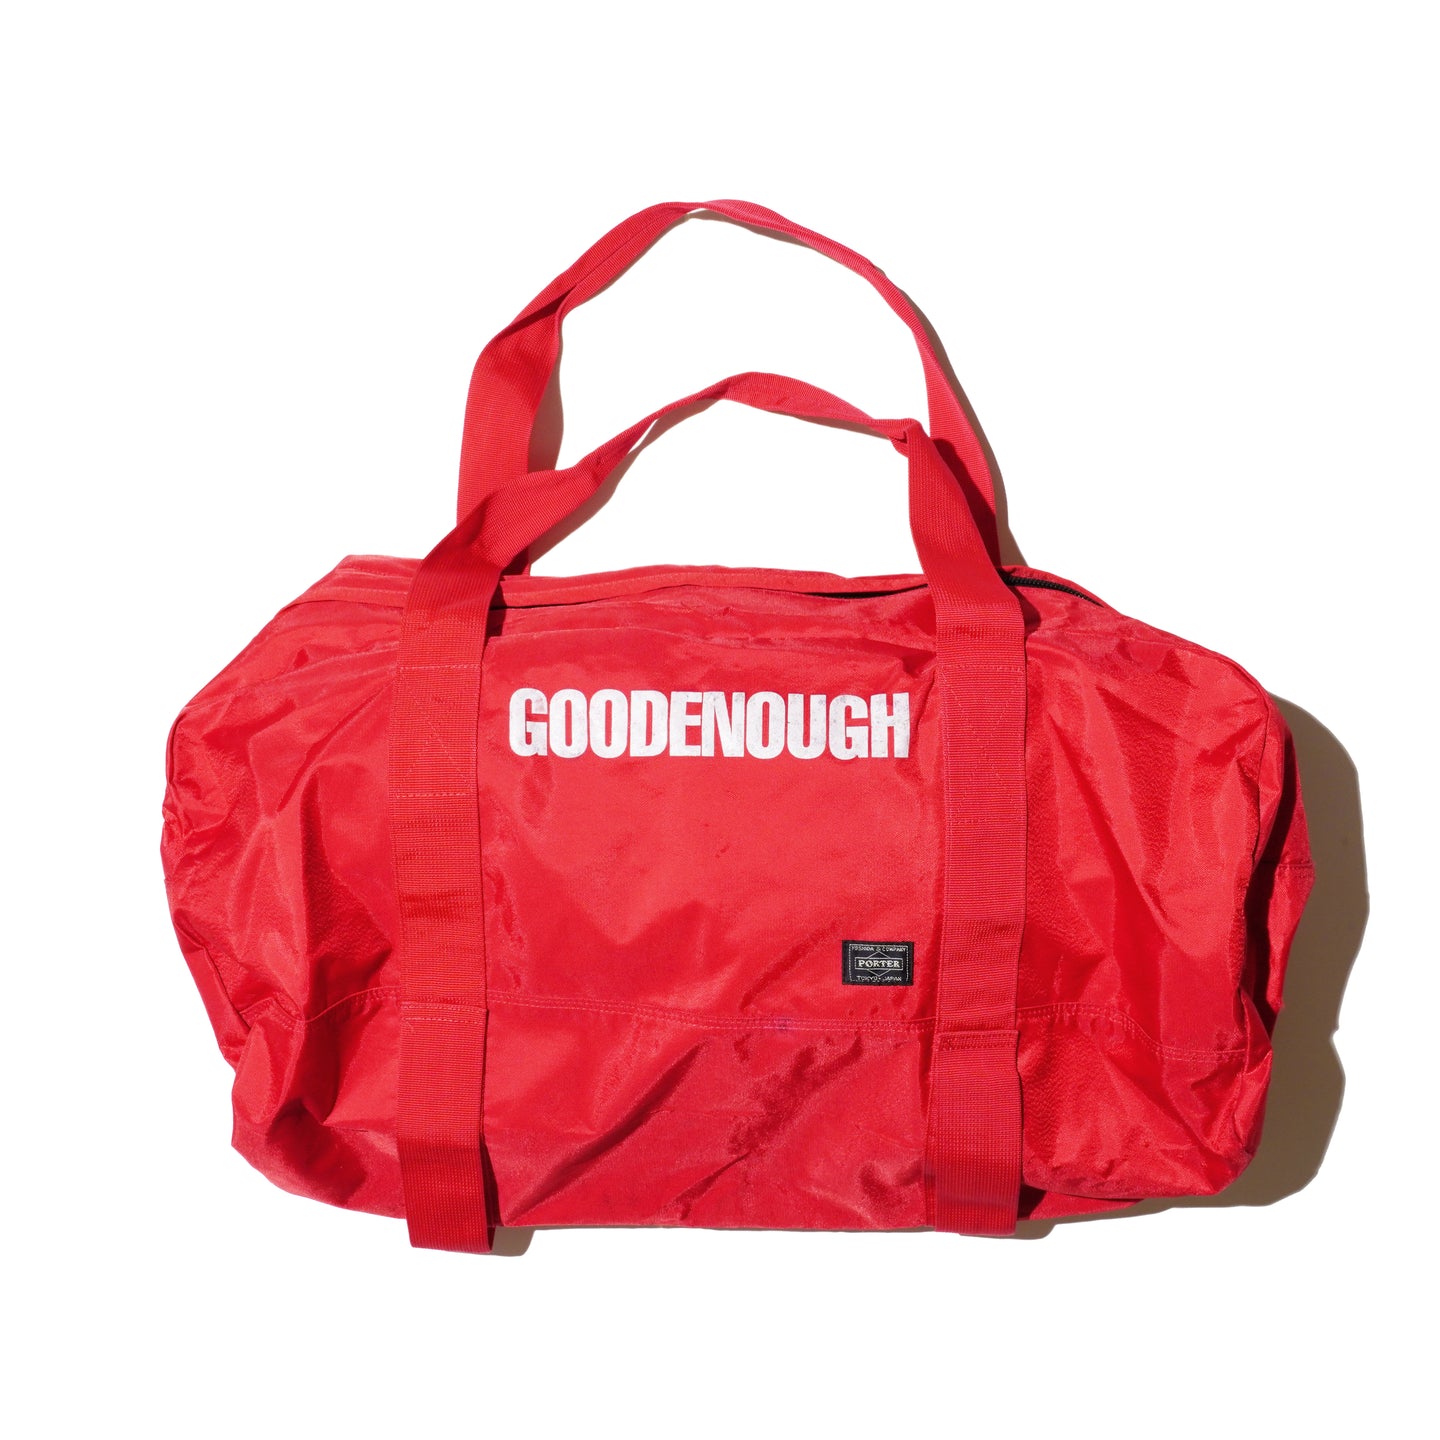 GOODENOUGH x Porter Duffle Bag (Large) – weareasterisk